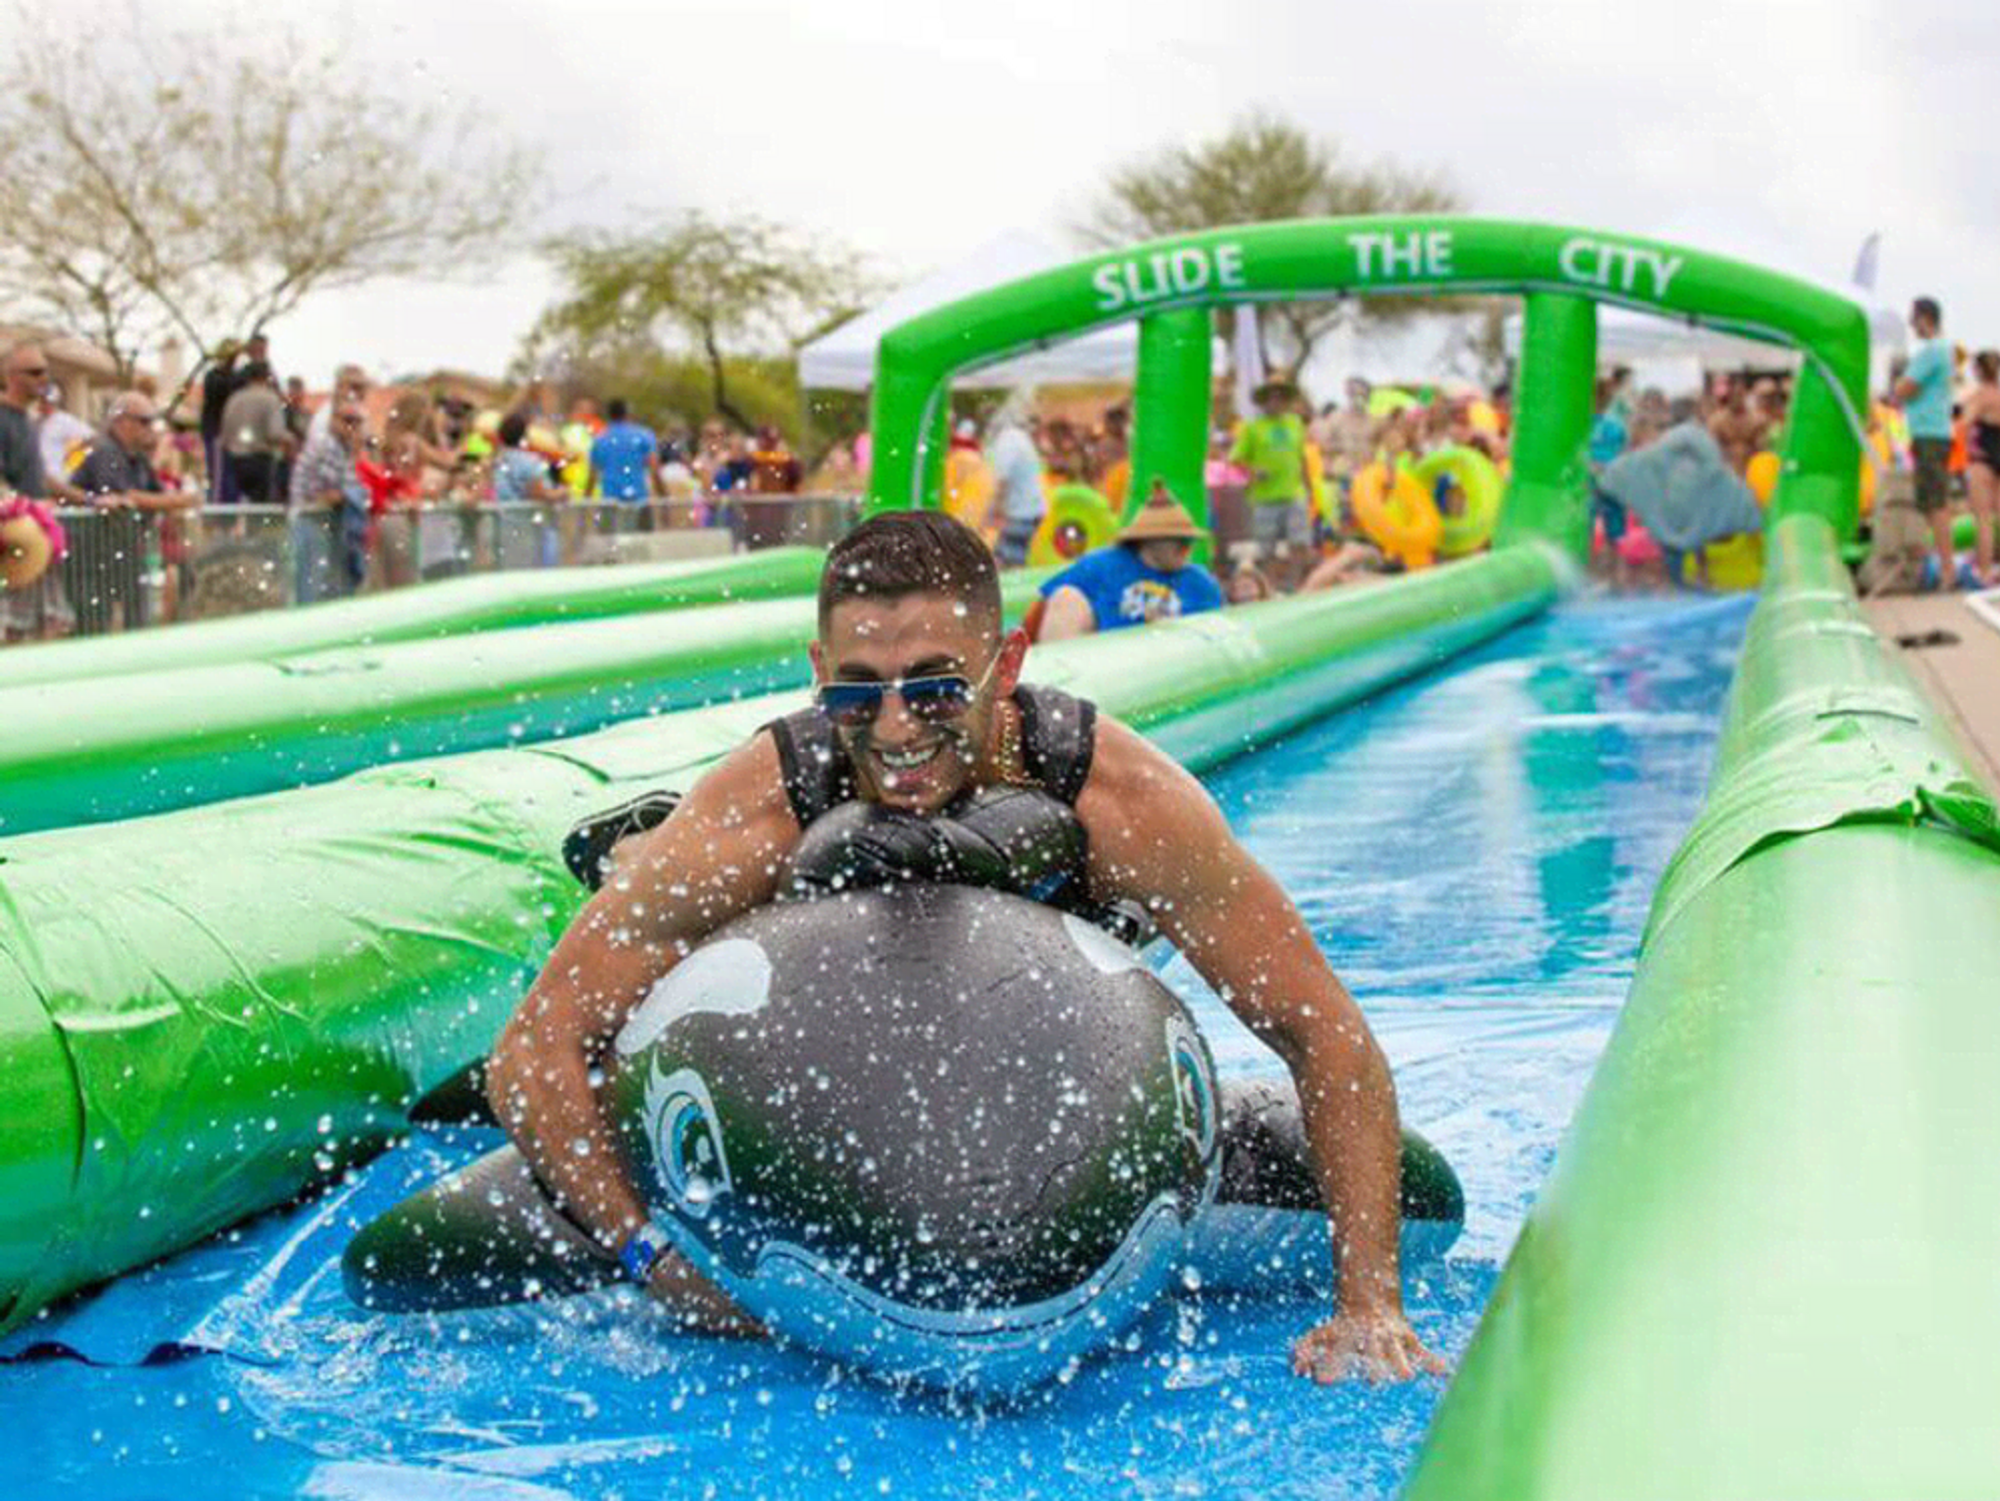 Slide the City Dallas will take place on Hampton Road in West Dallas on August 22.